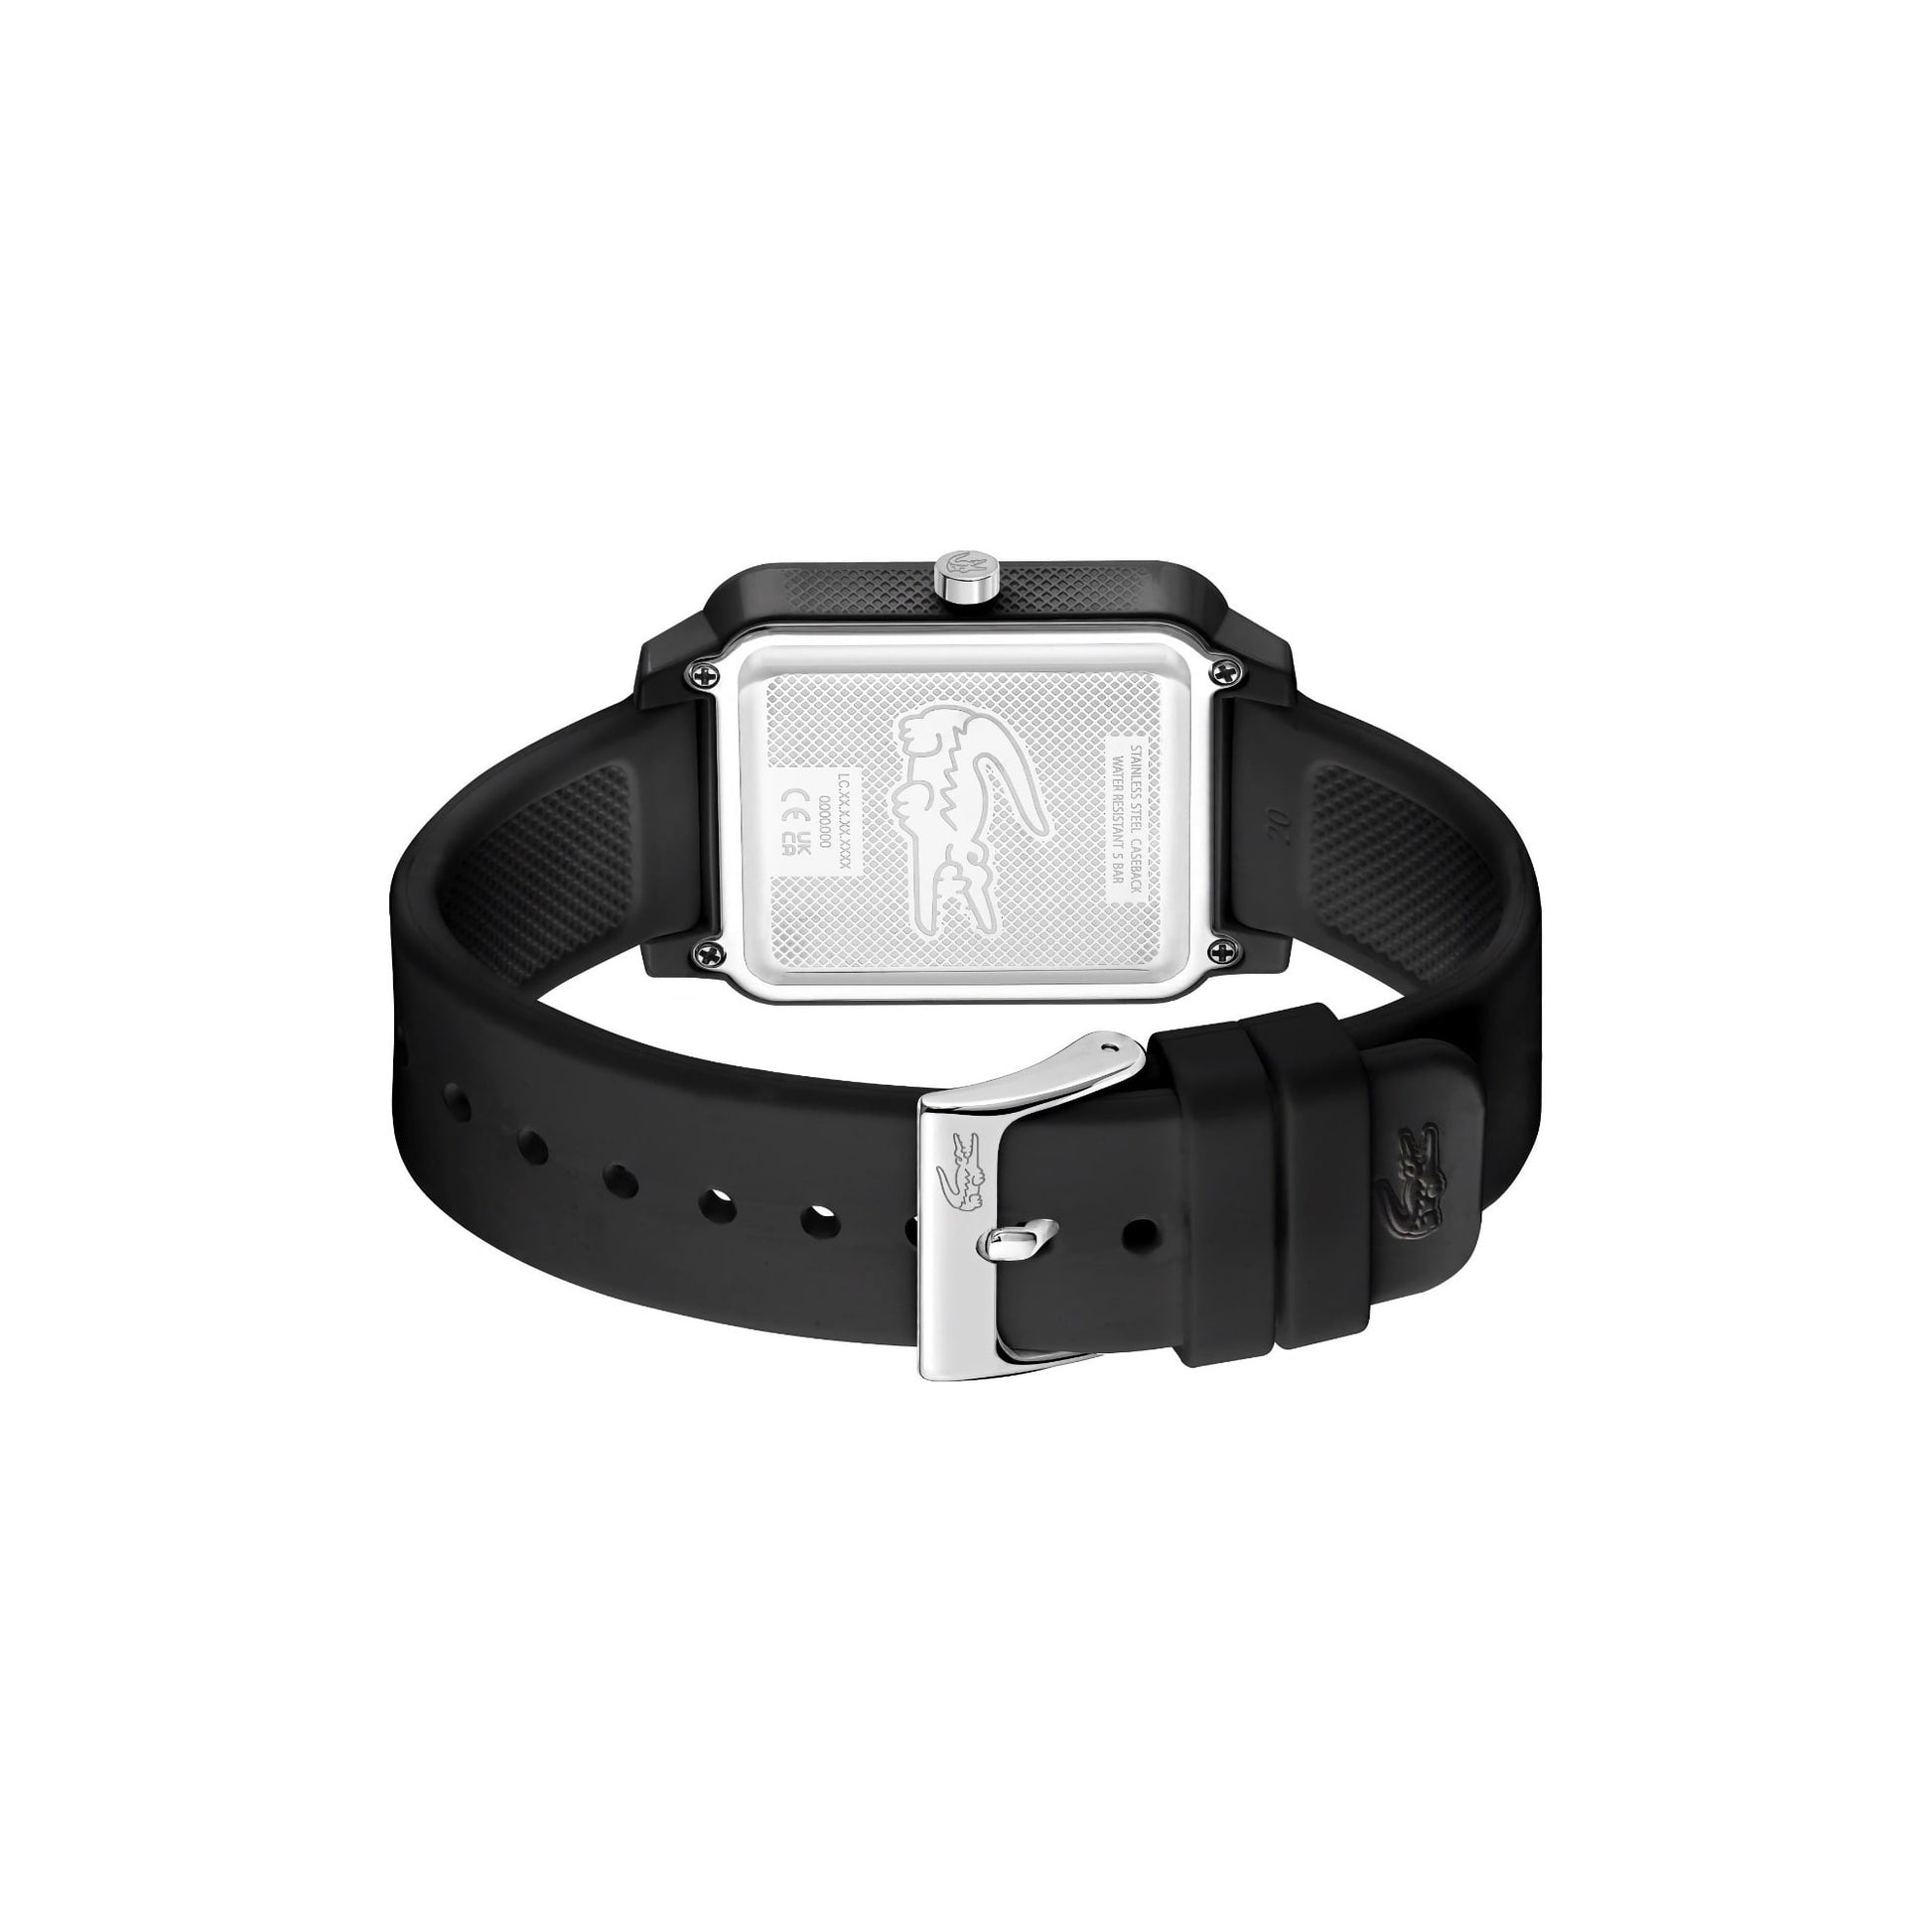 A Lacoste.12.12 Studio 3 Hands Watch Black Silicone by Lacoste showcased in a minimalist studio setting.